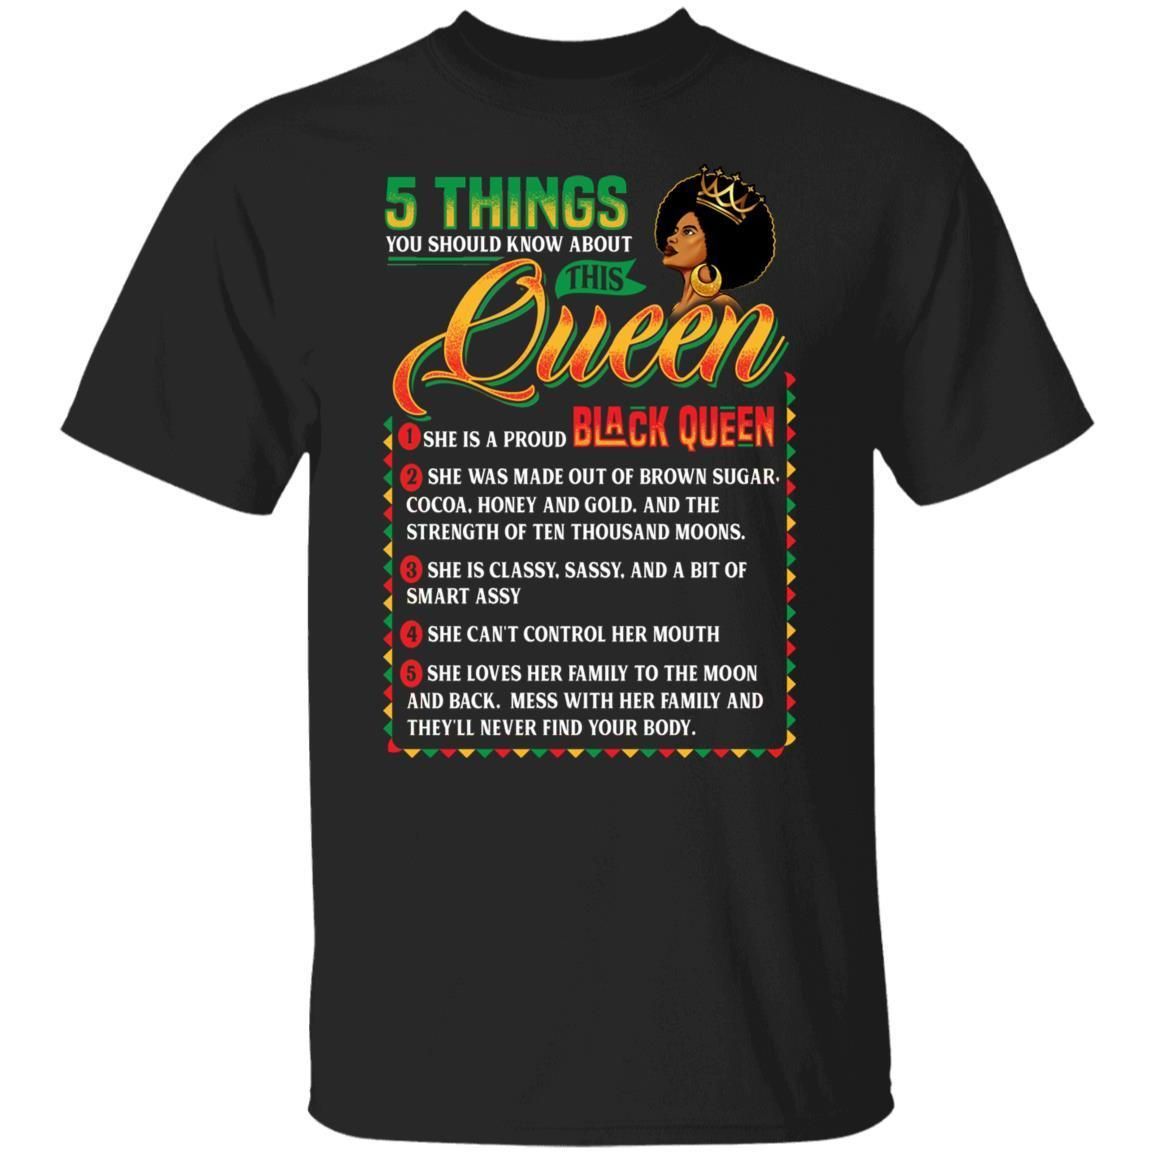 5 Things About Black Queen T-Shirt